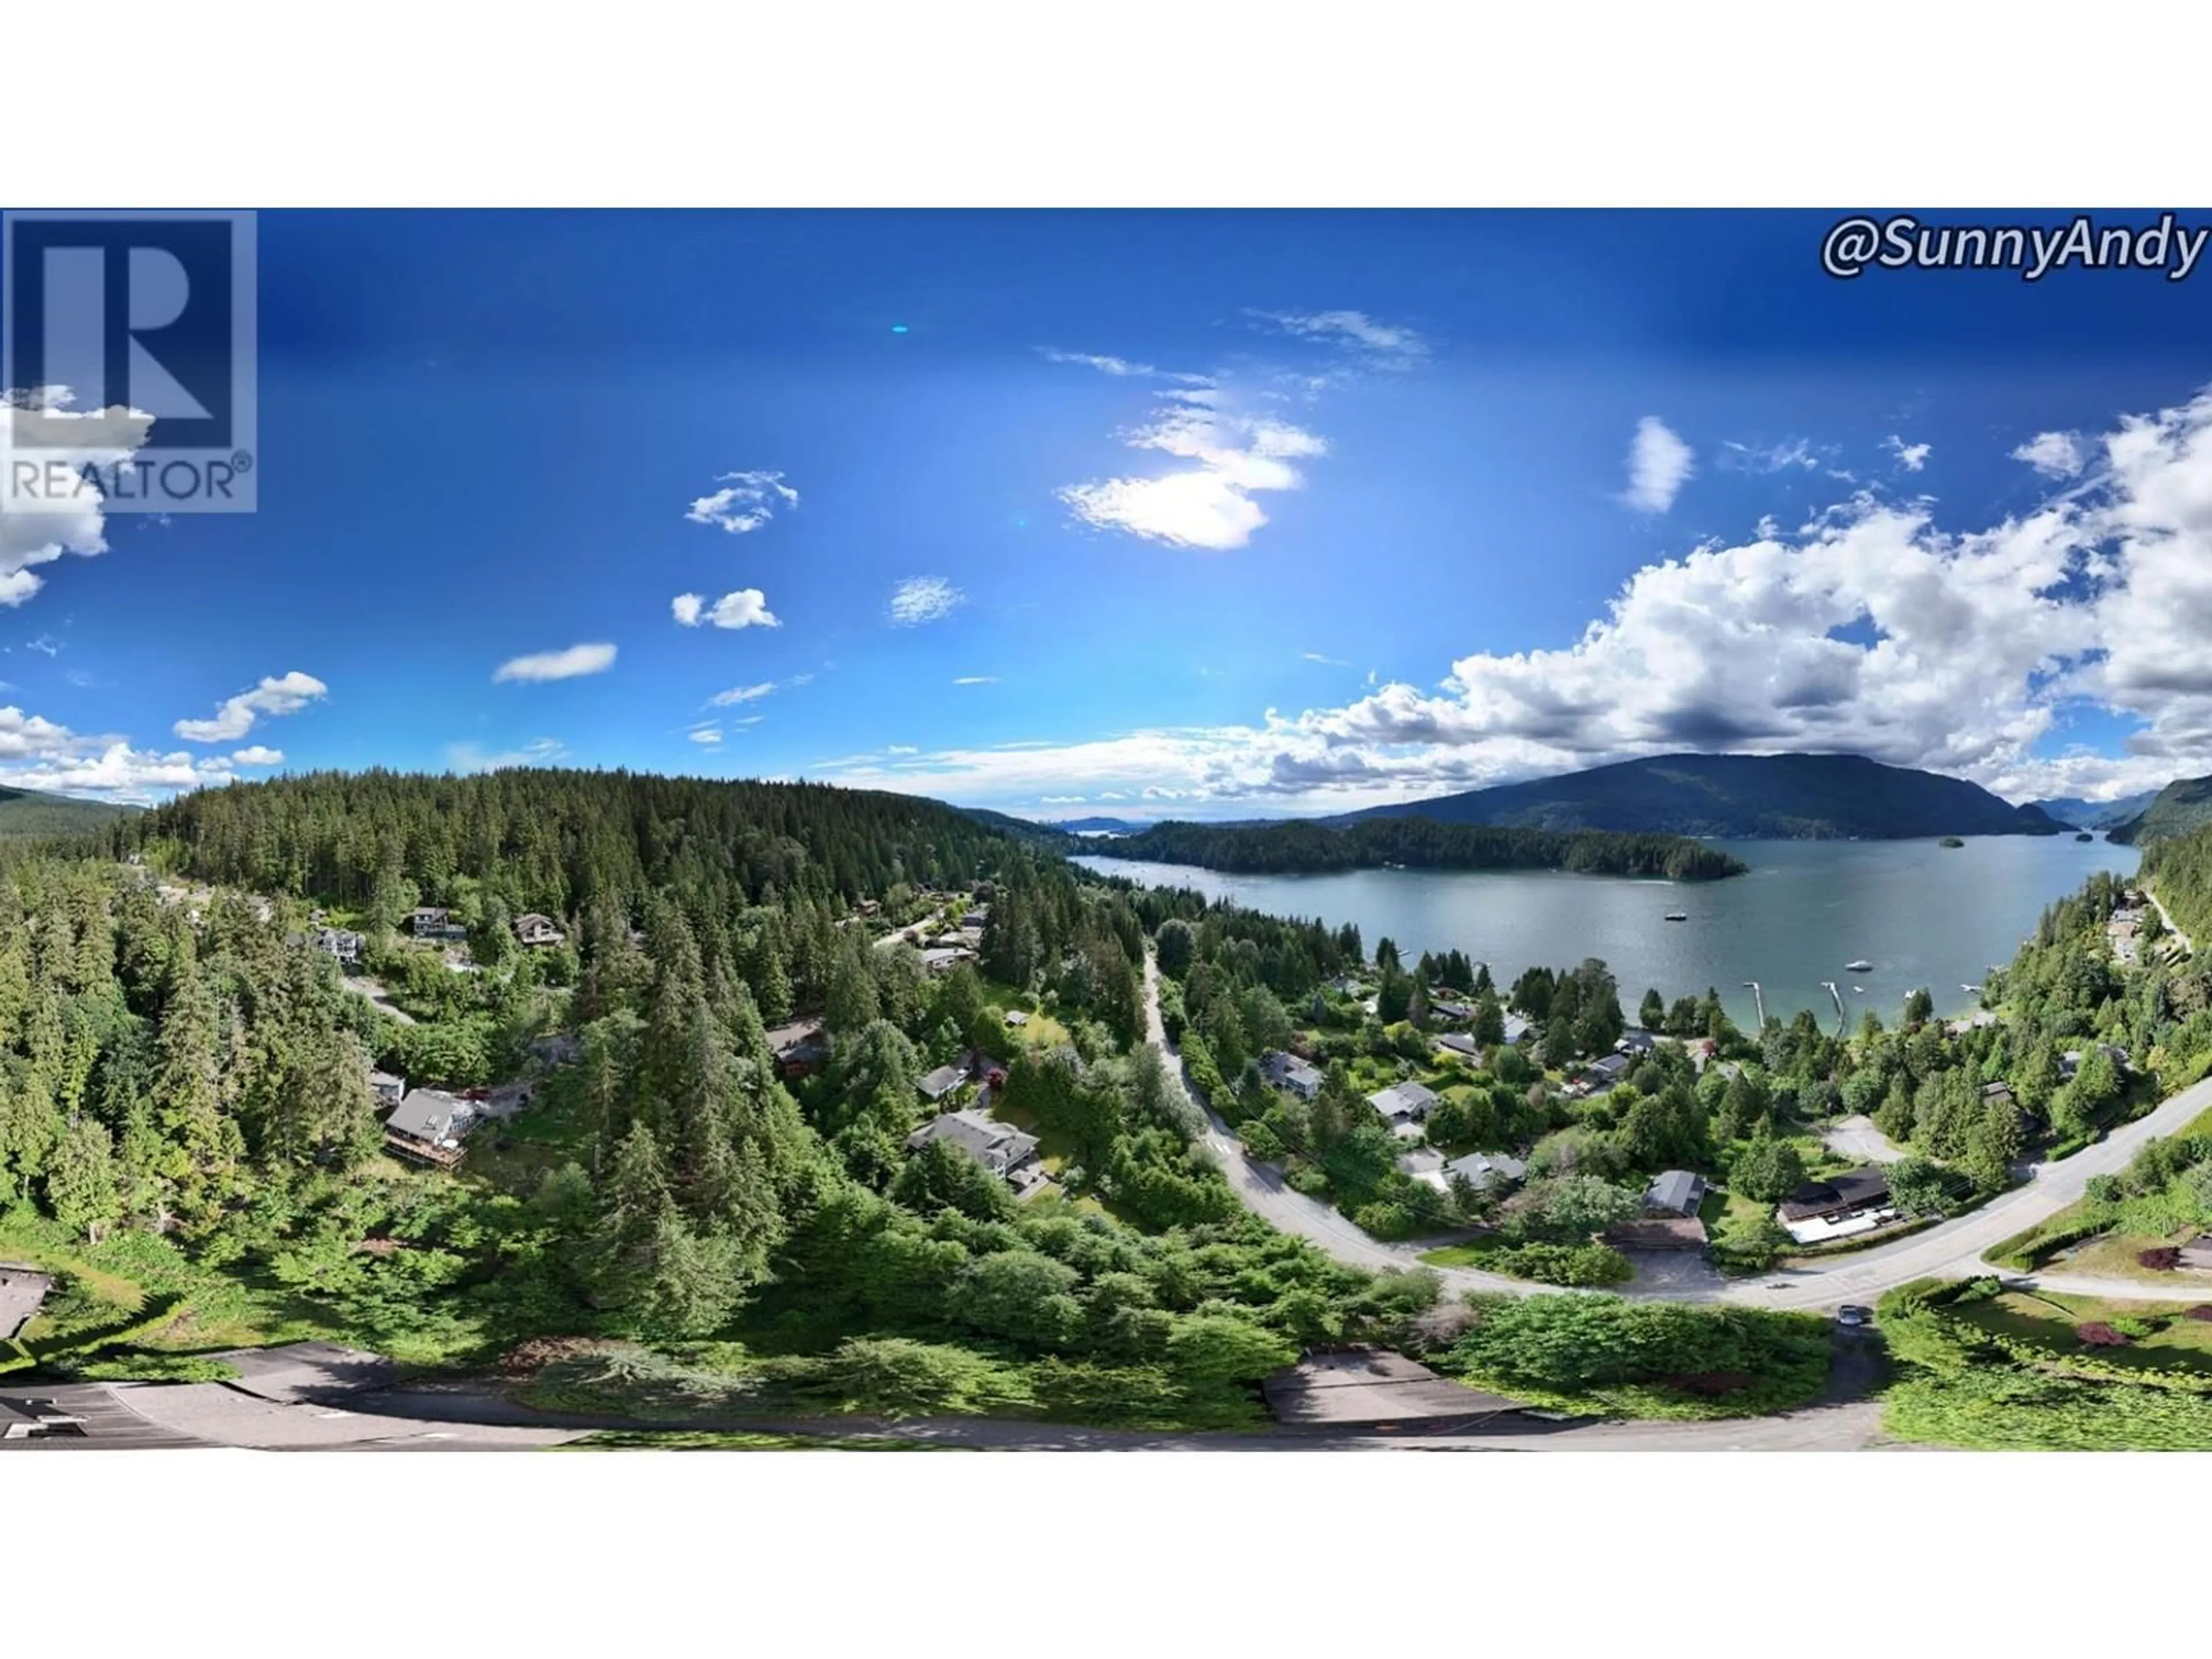 Lakeview for 3450 BEDWELL BAY ROAD, Belcarra British Columbia V3H4S2